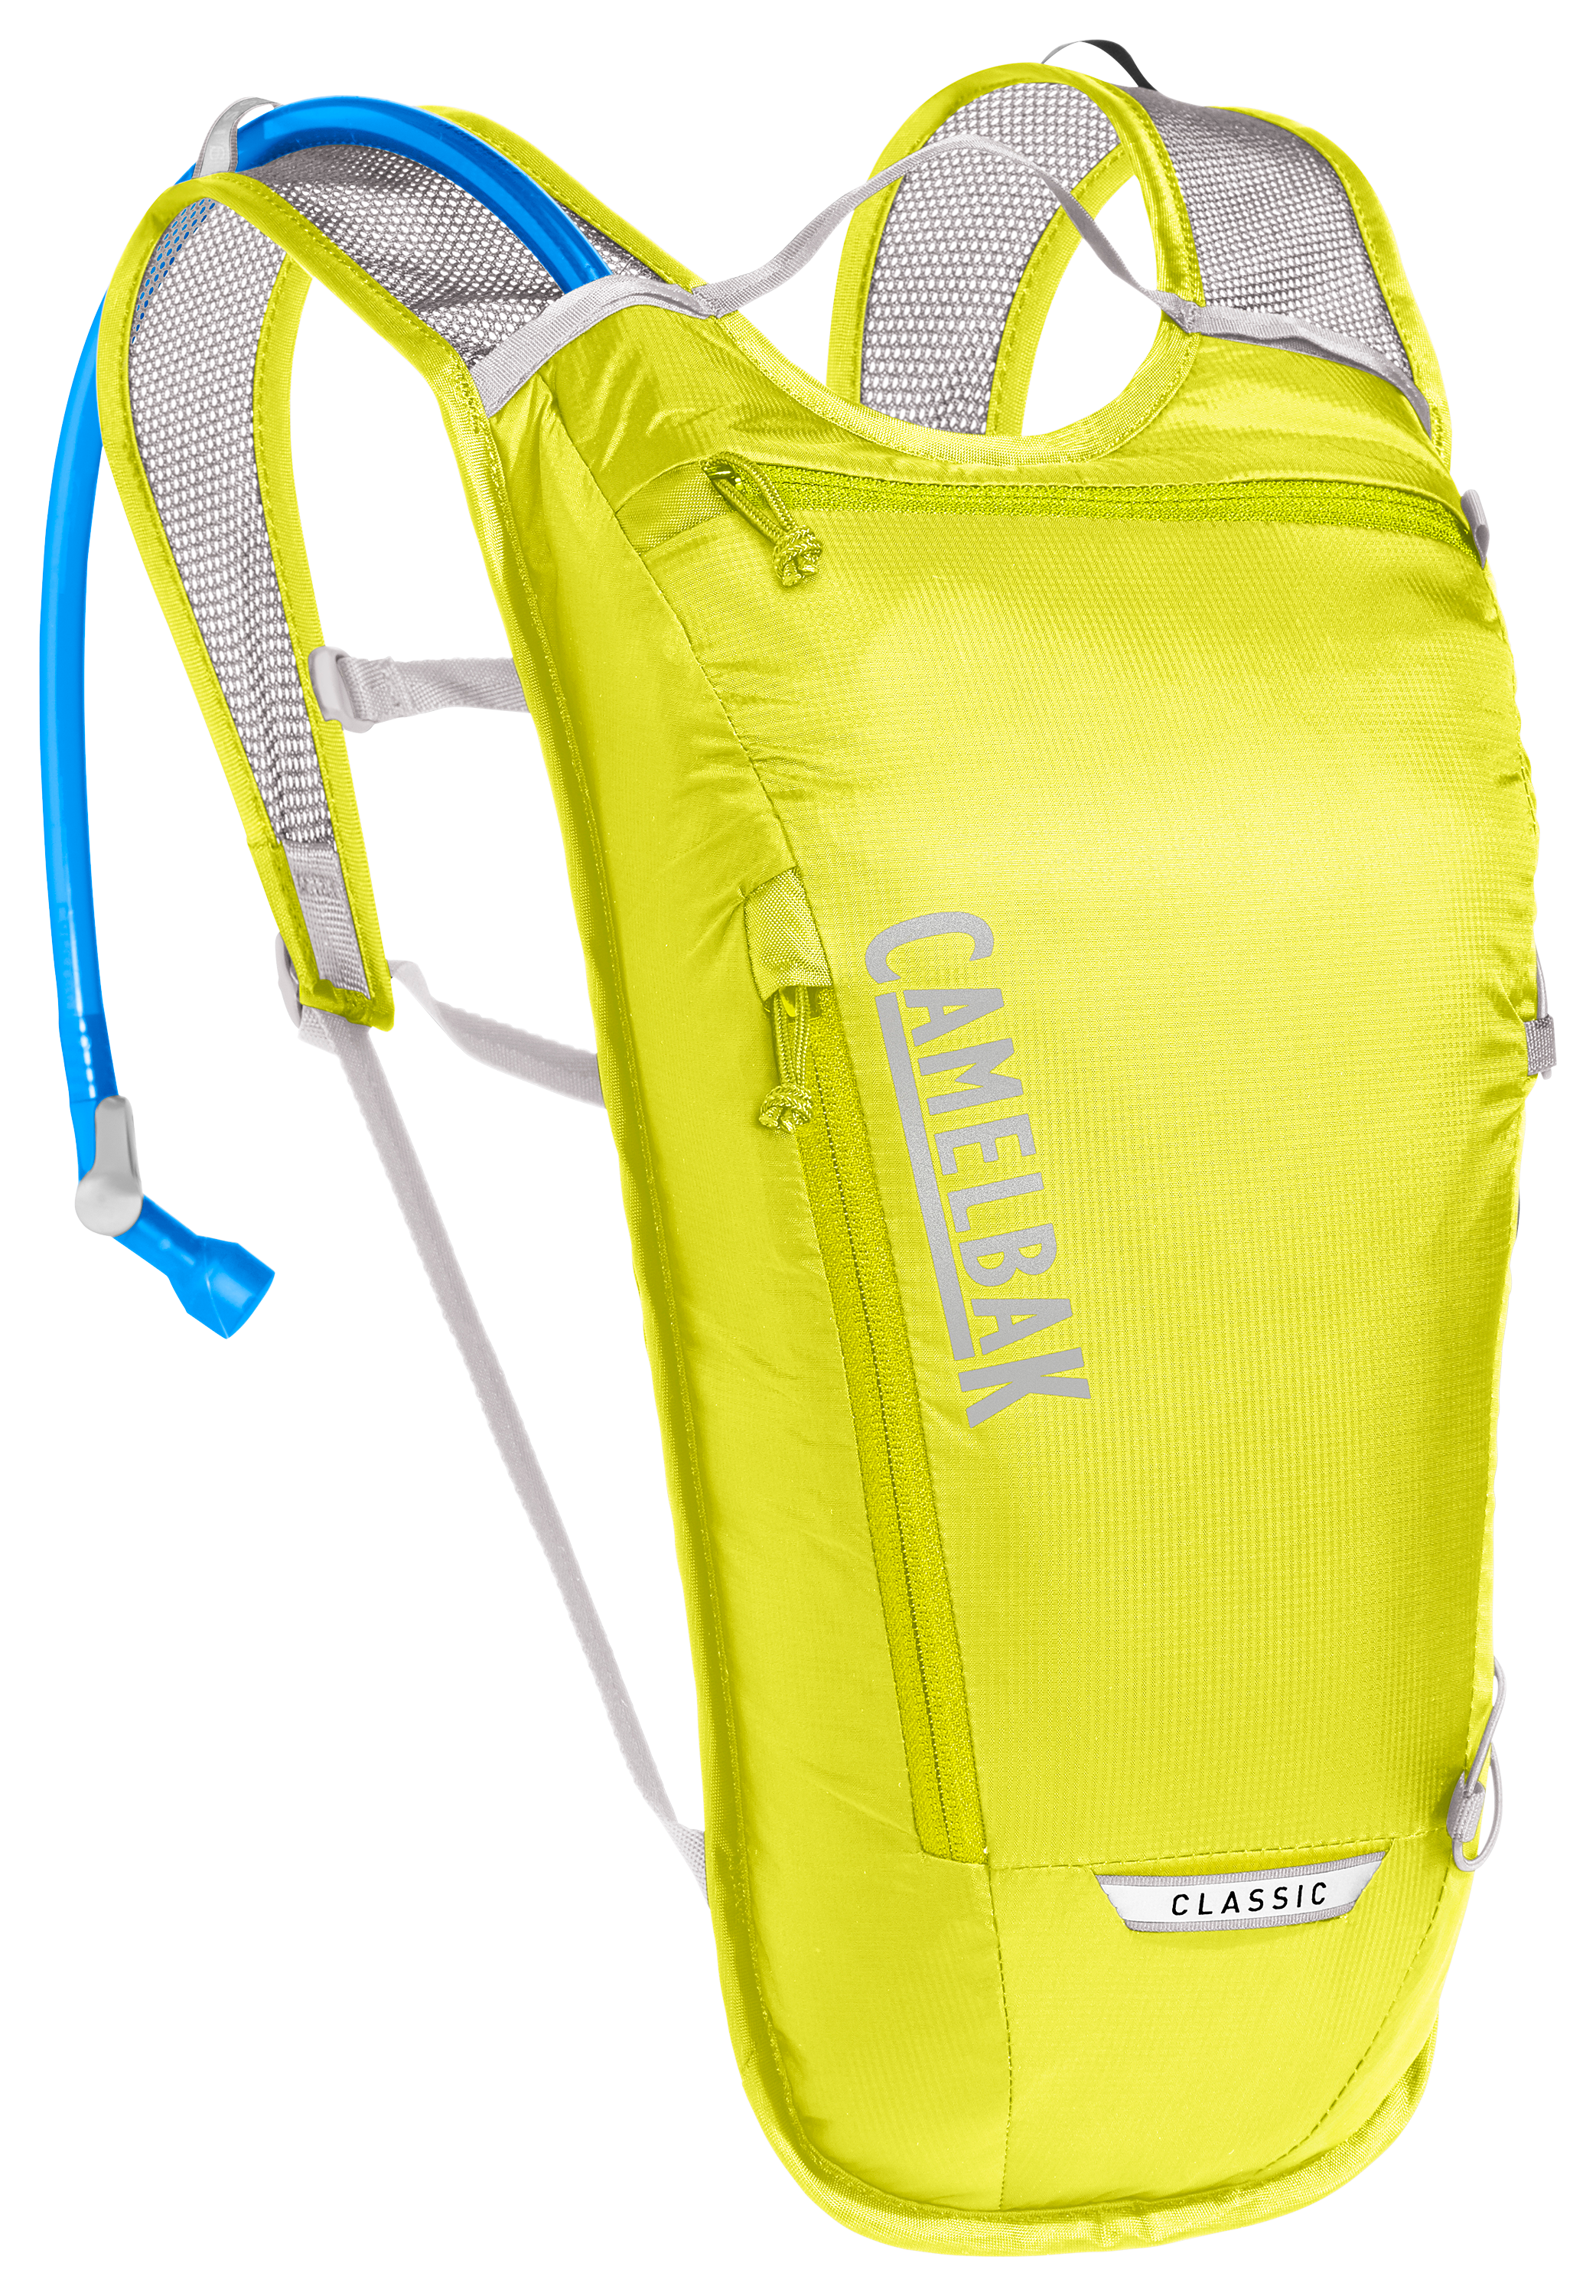 CamelBak Classic Light 70-oz. Hydration Pack - Safety Yellow/Silver